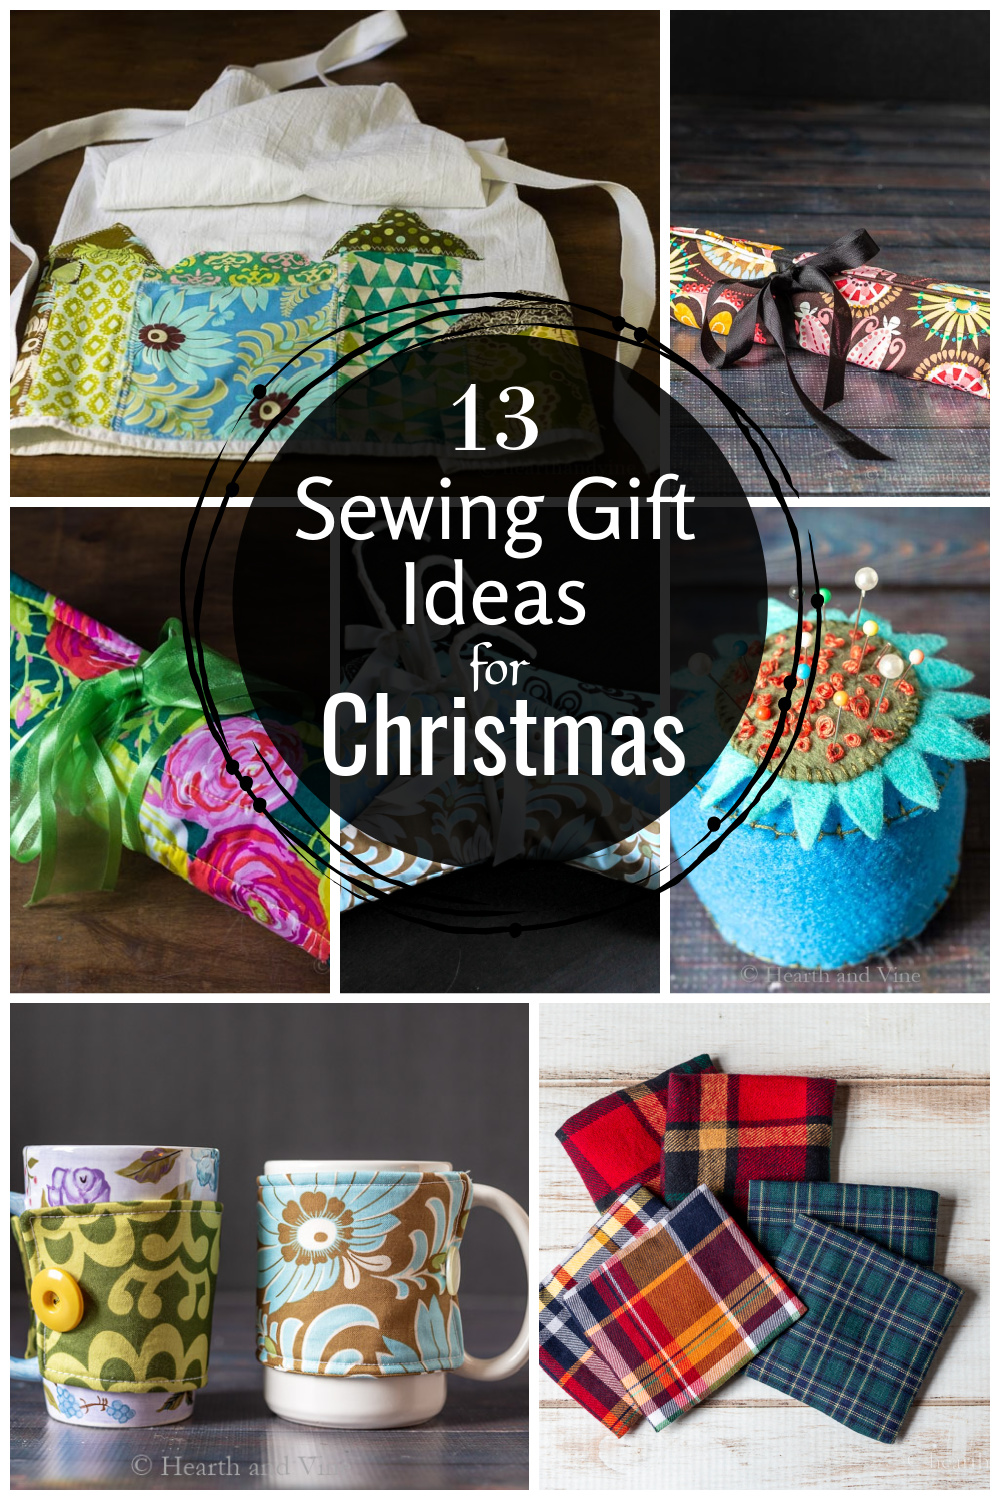 I'm all about homemade gifts this year and have so many fun sewing ide, Homemade Gift Ideas